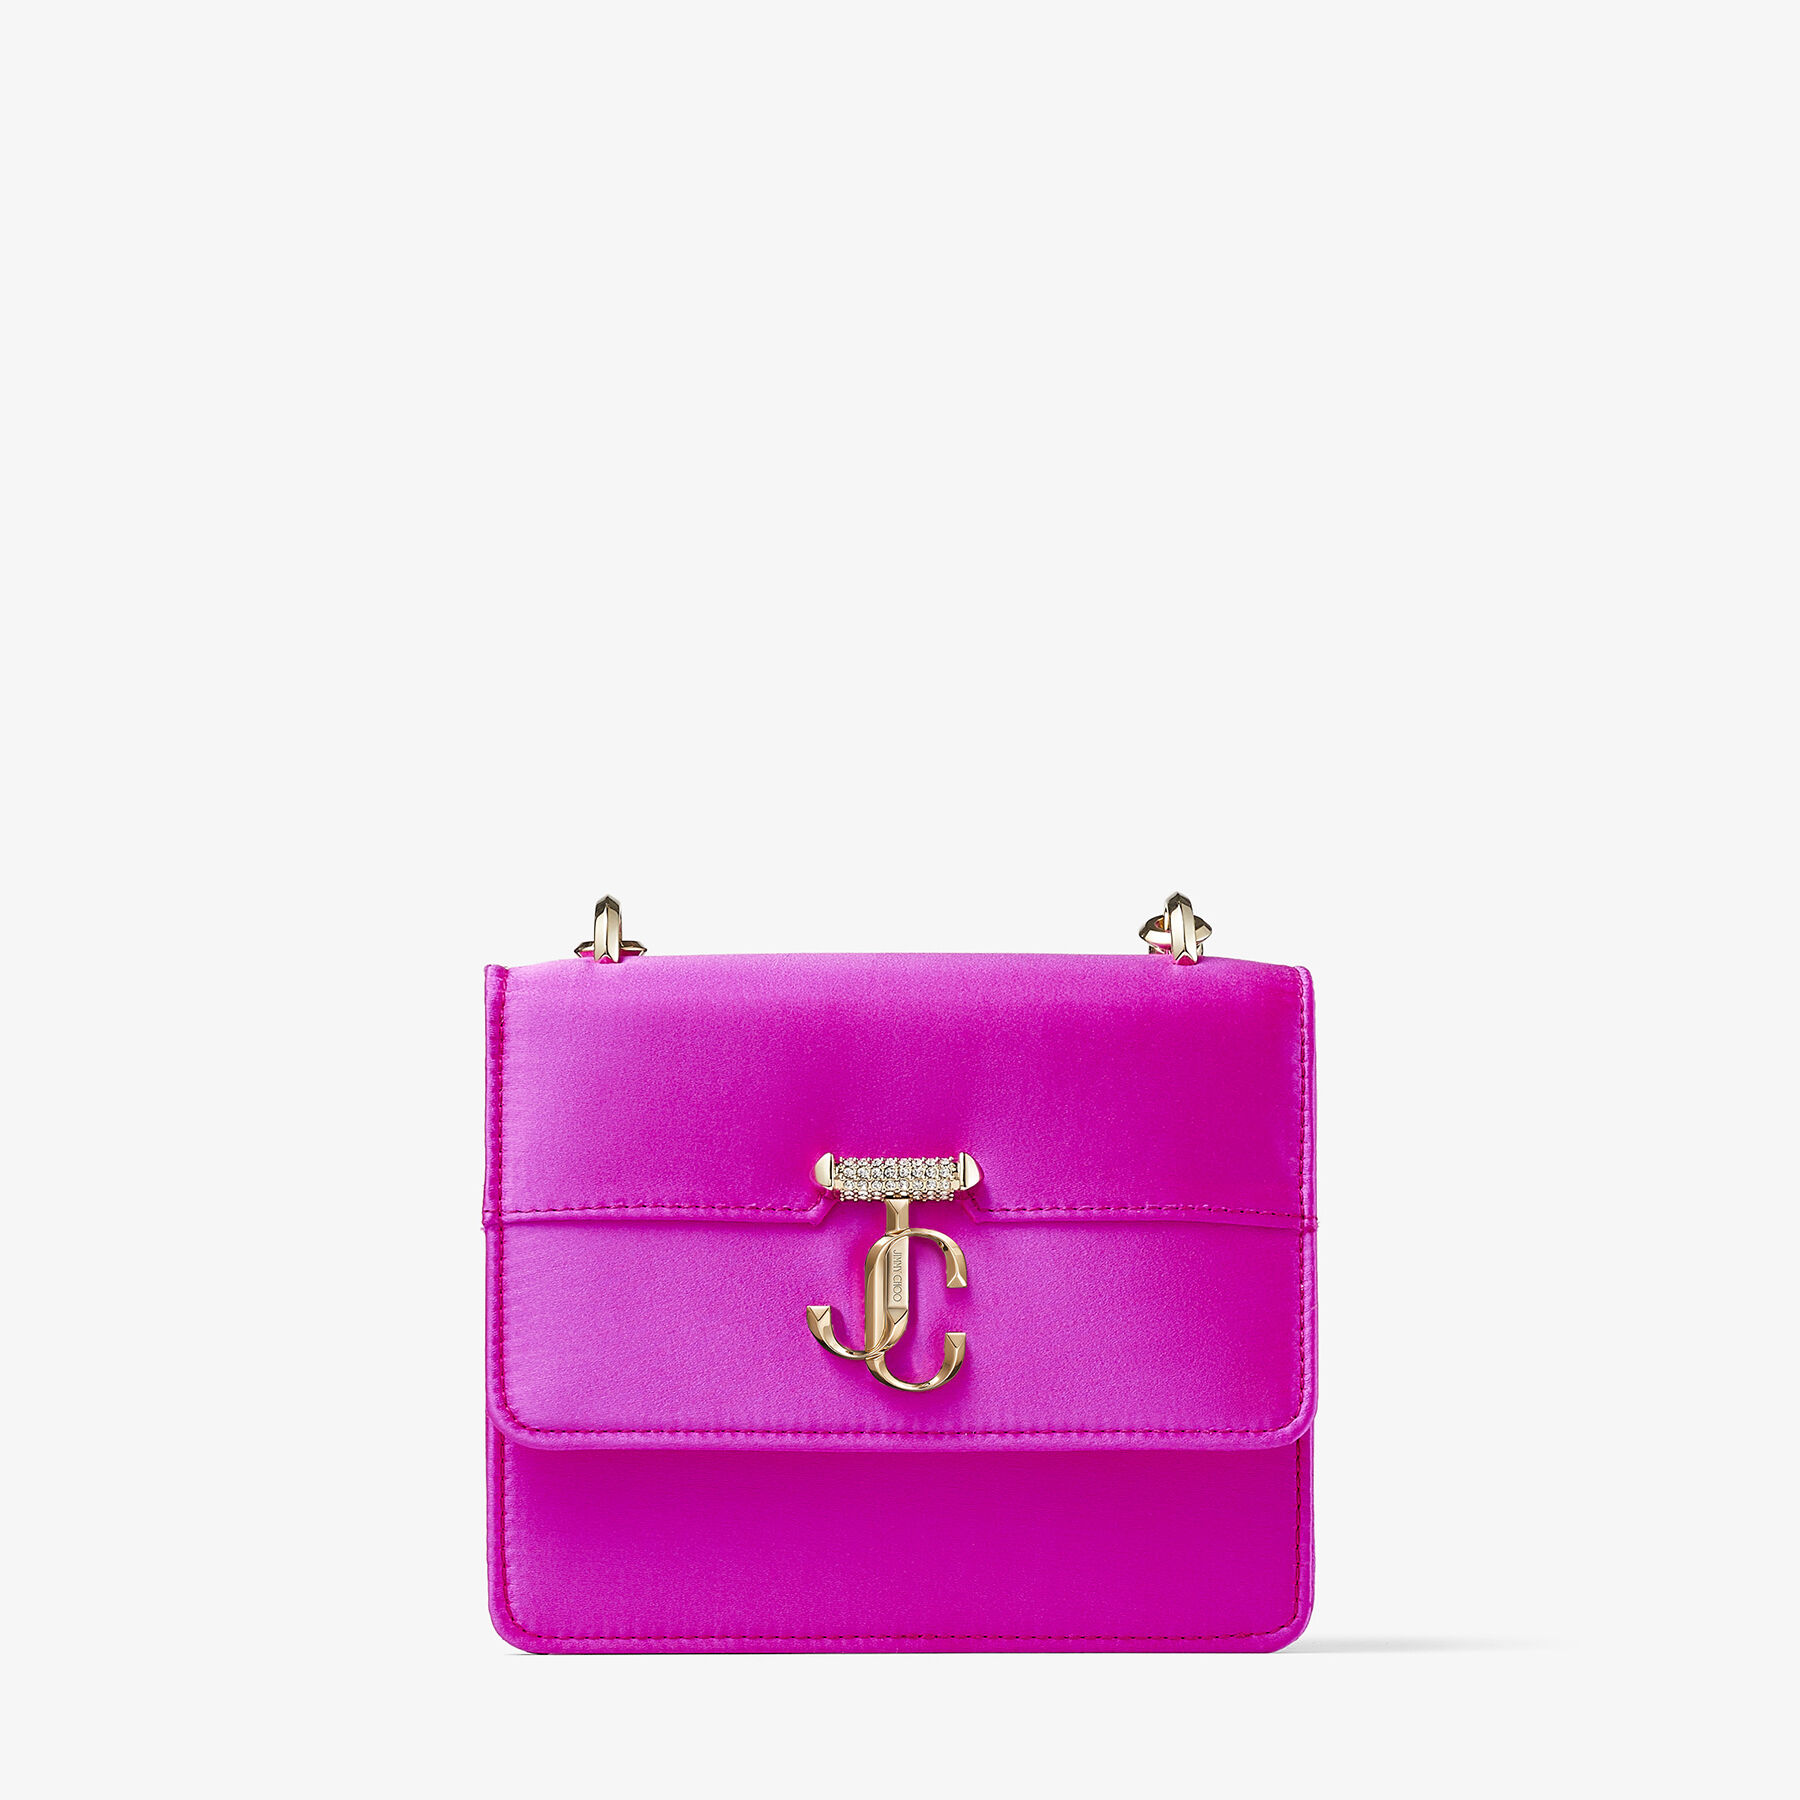 Ballet Pink Box Leather Shoulder Bag with Pearl Strap, AVENUE QUAD XS, Summer 2022 collection